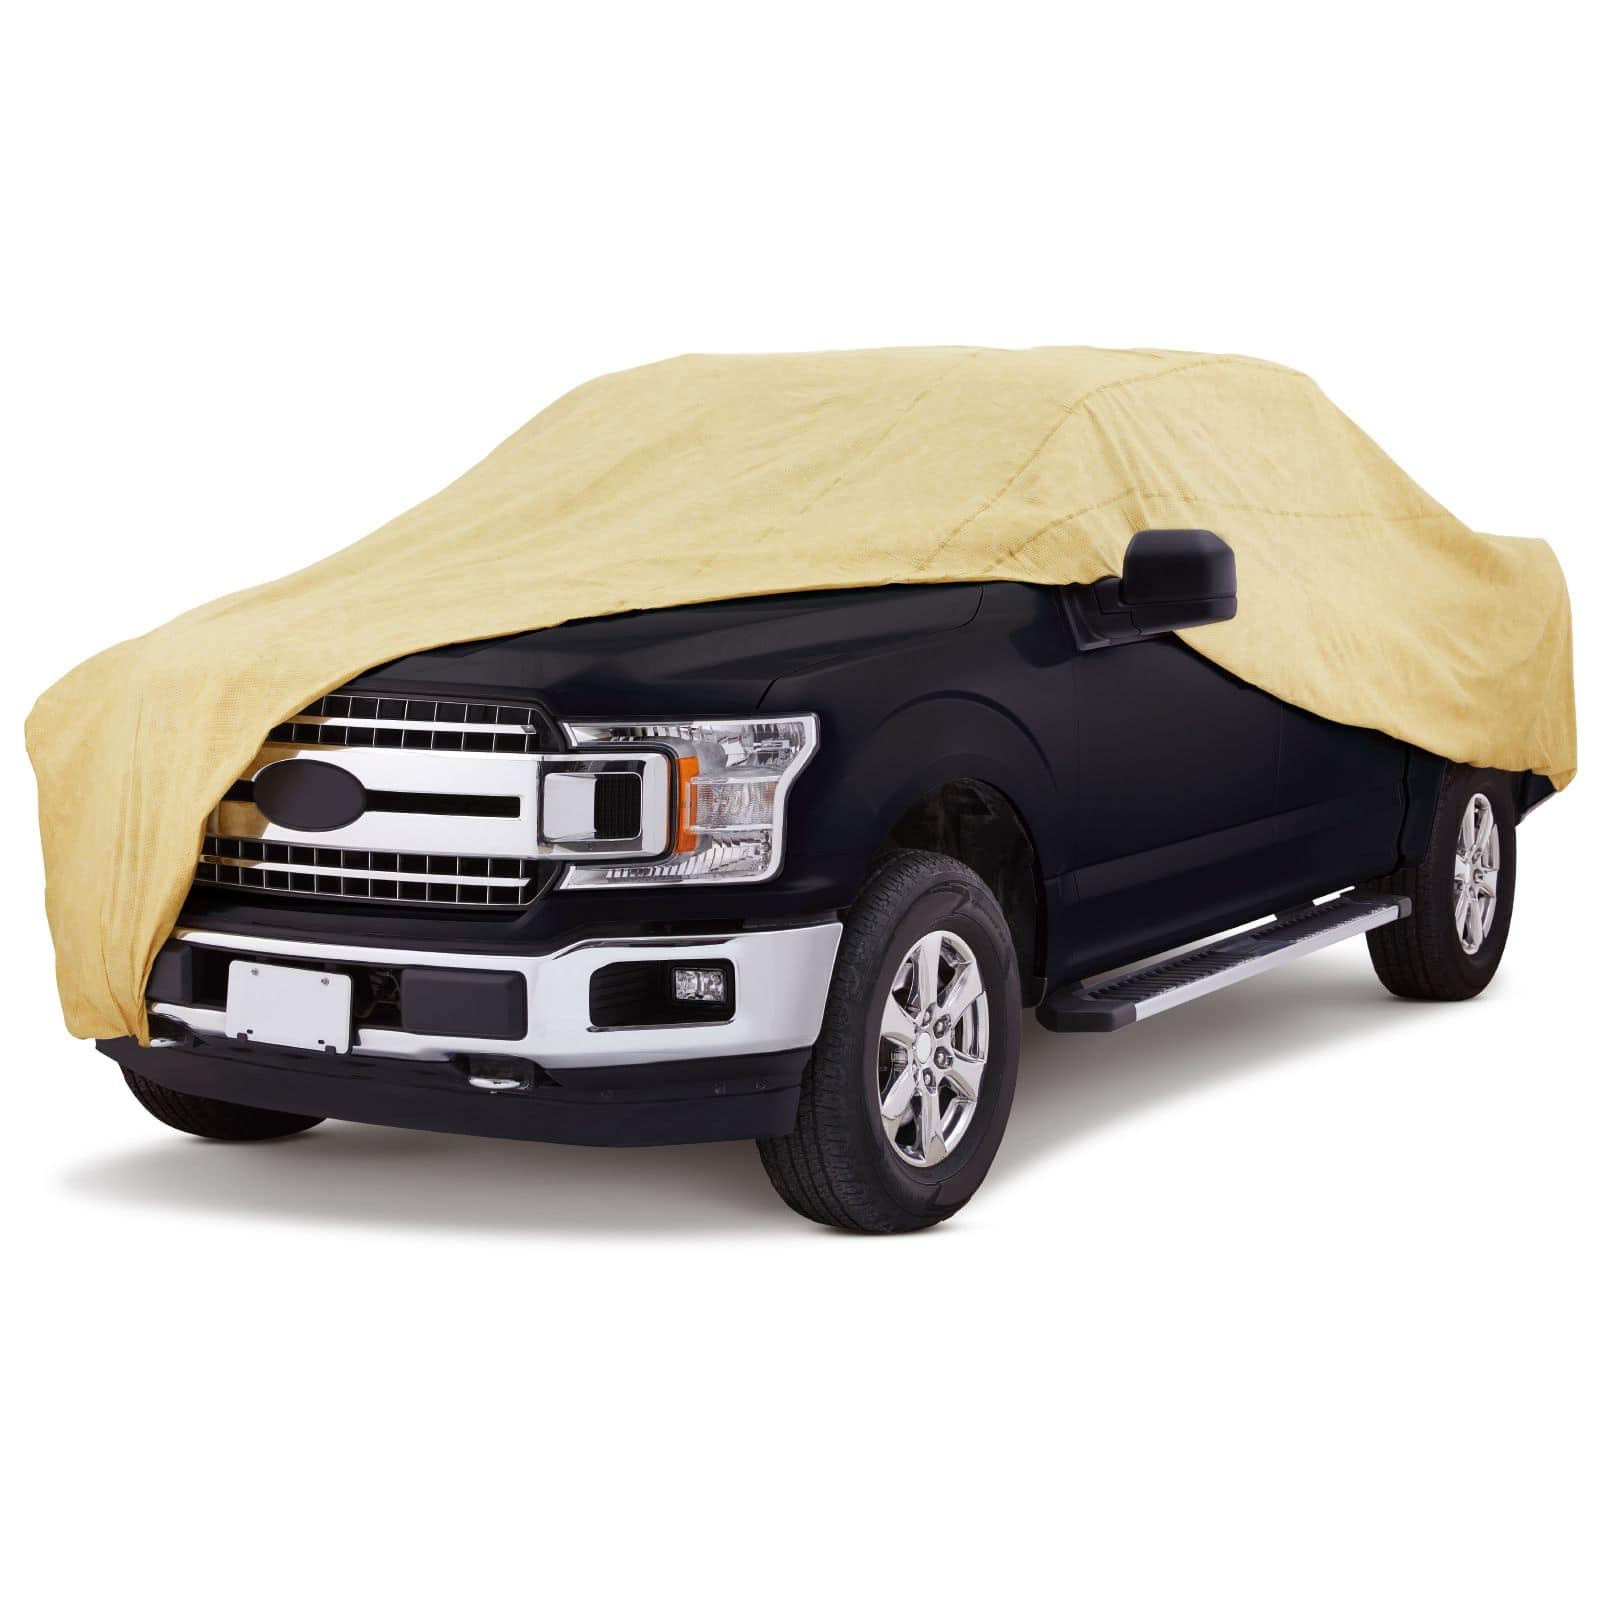 https://media-www.canadiantire.ca/product/automotive/car-care-accessories/auto-shelters-and-car-covers/0412683/simoniz-reg-truck-cover-cac1b2f3-5139-4a58-af9e-ae370f5166bf-jpgrendition.jpg